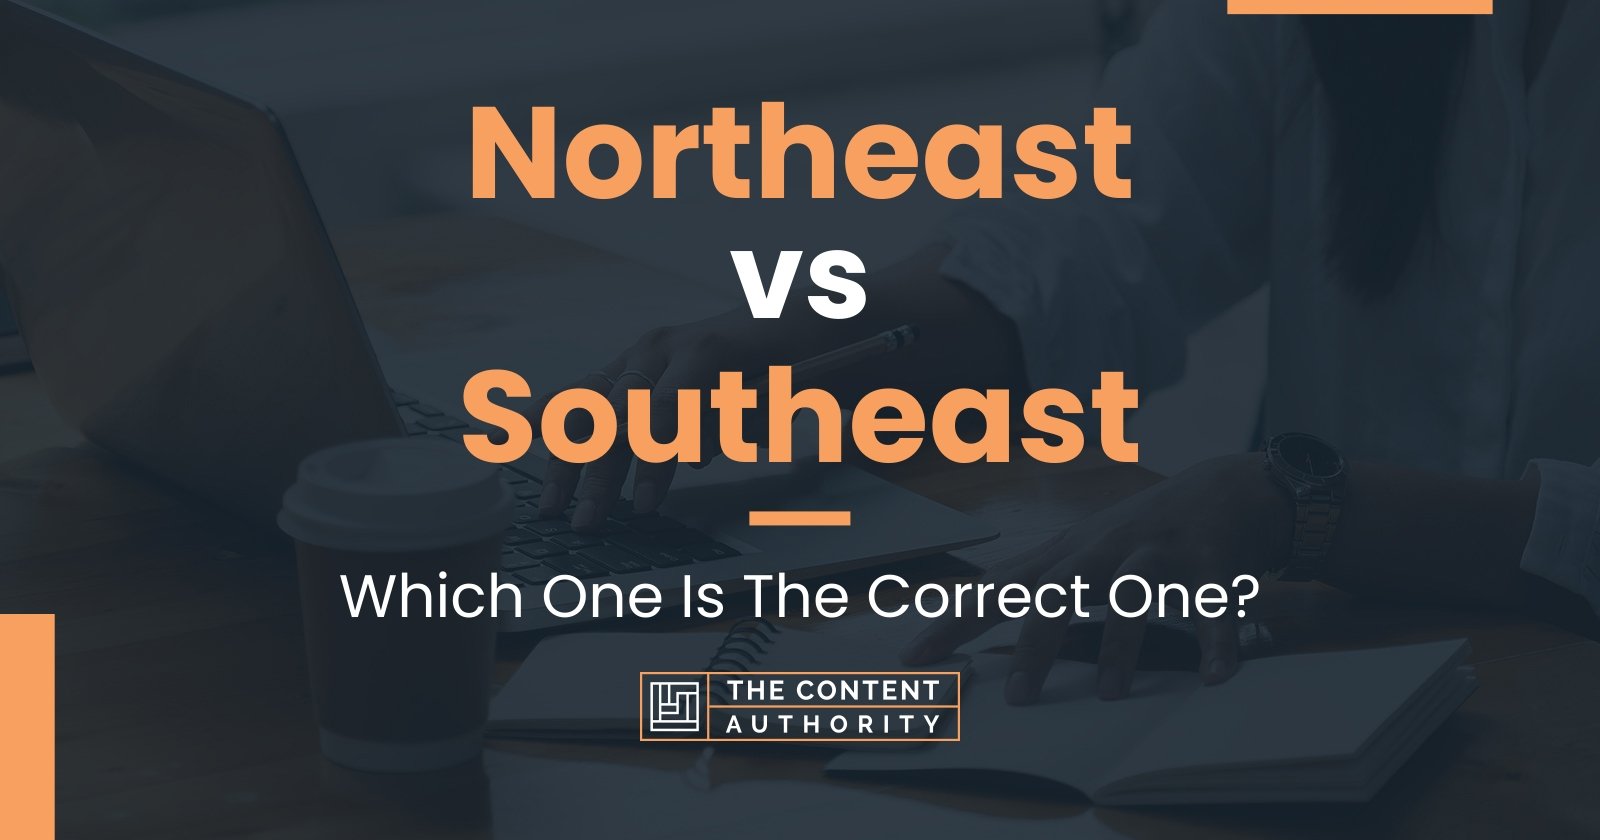 Northeast vs Southeast: Which One Is The Correct One?